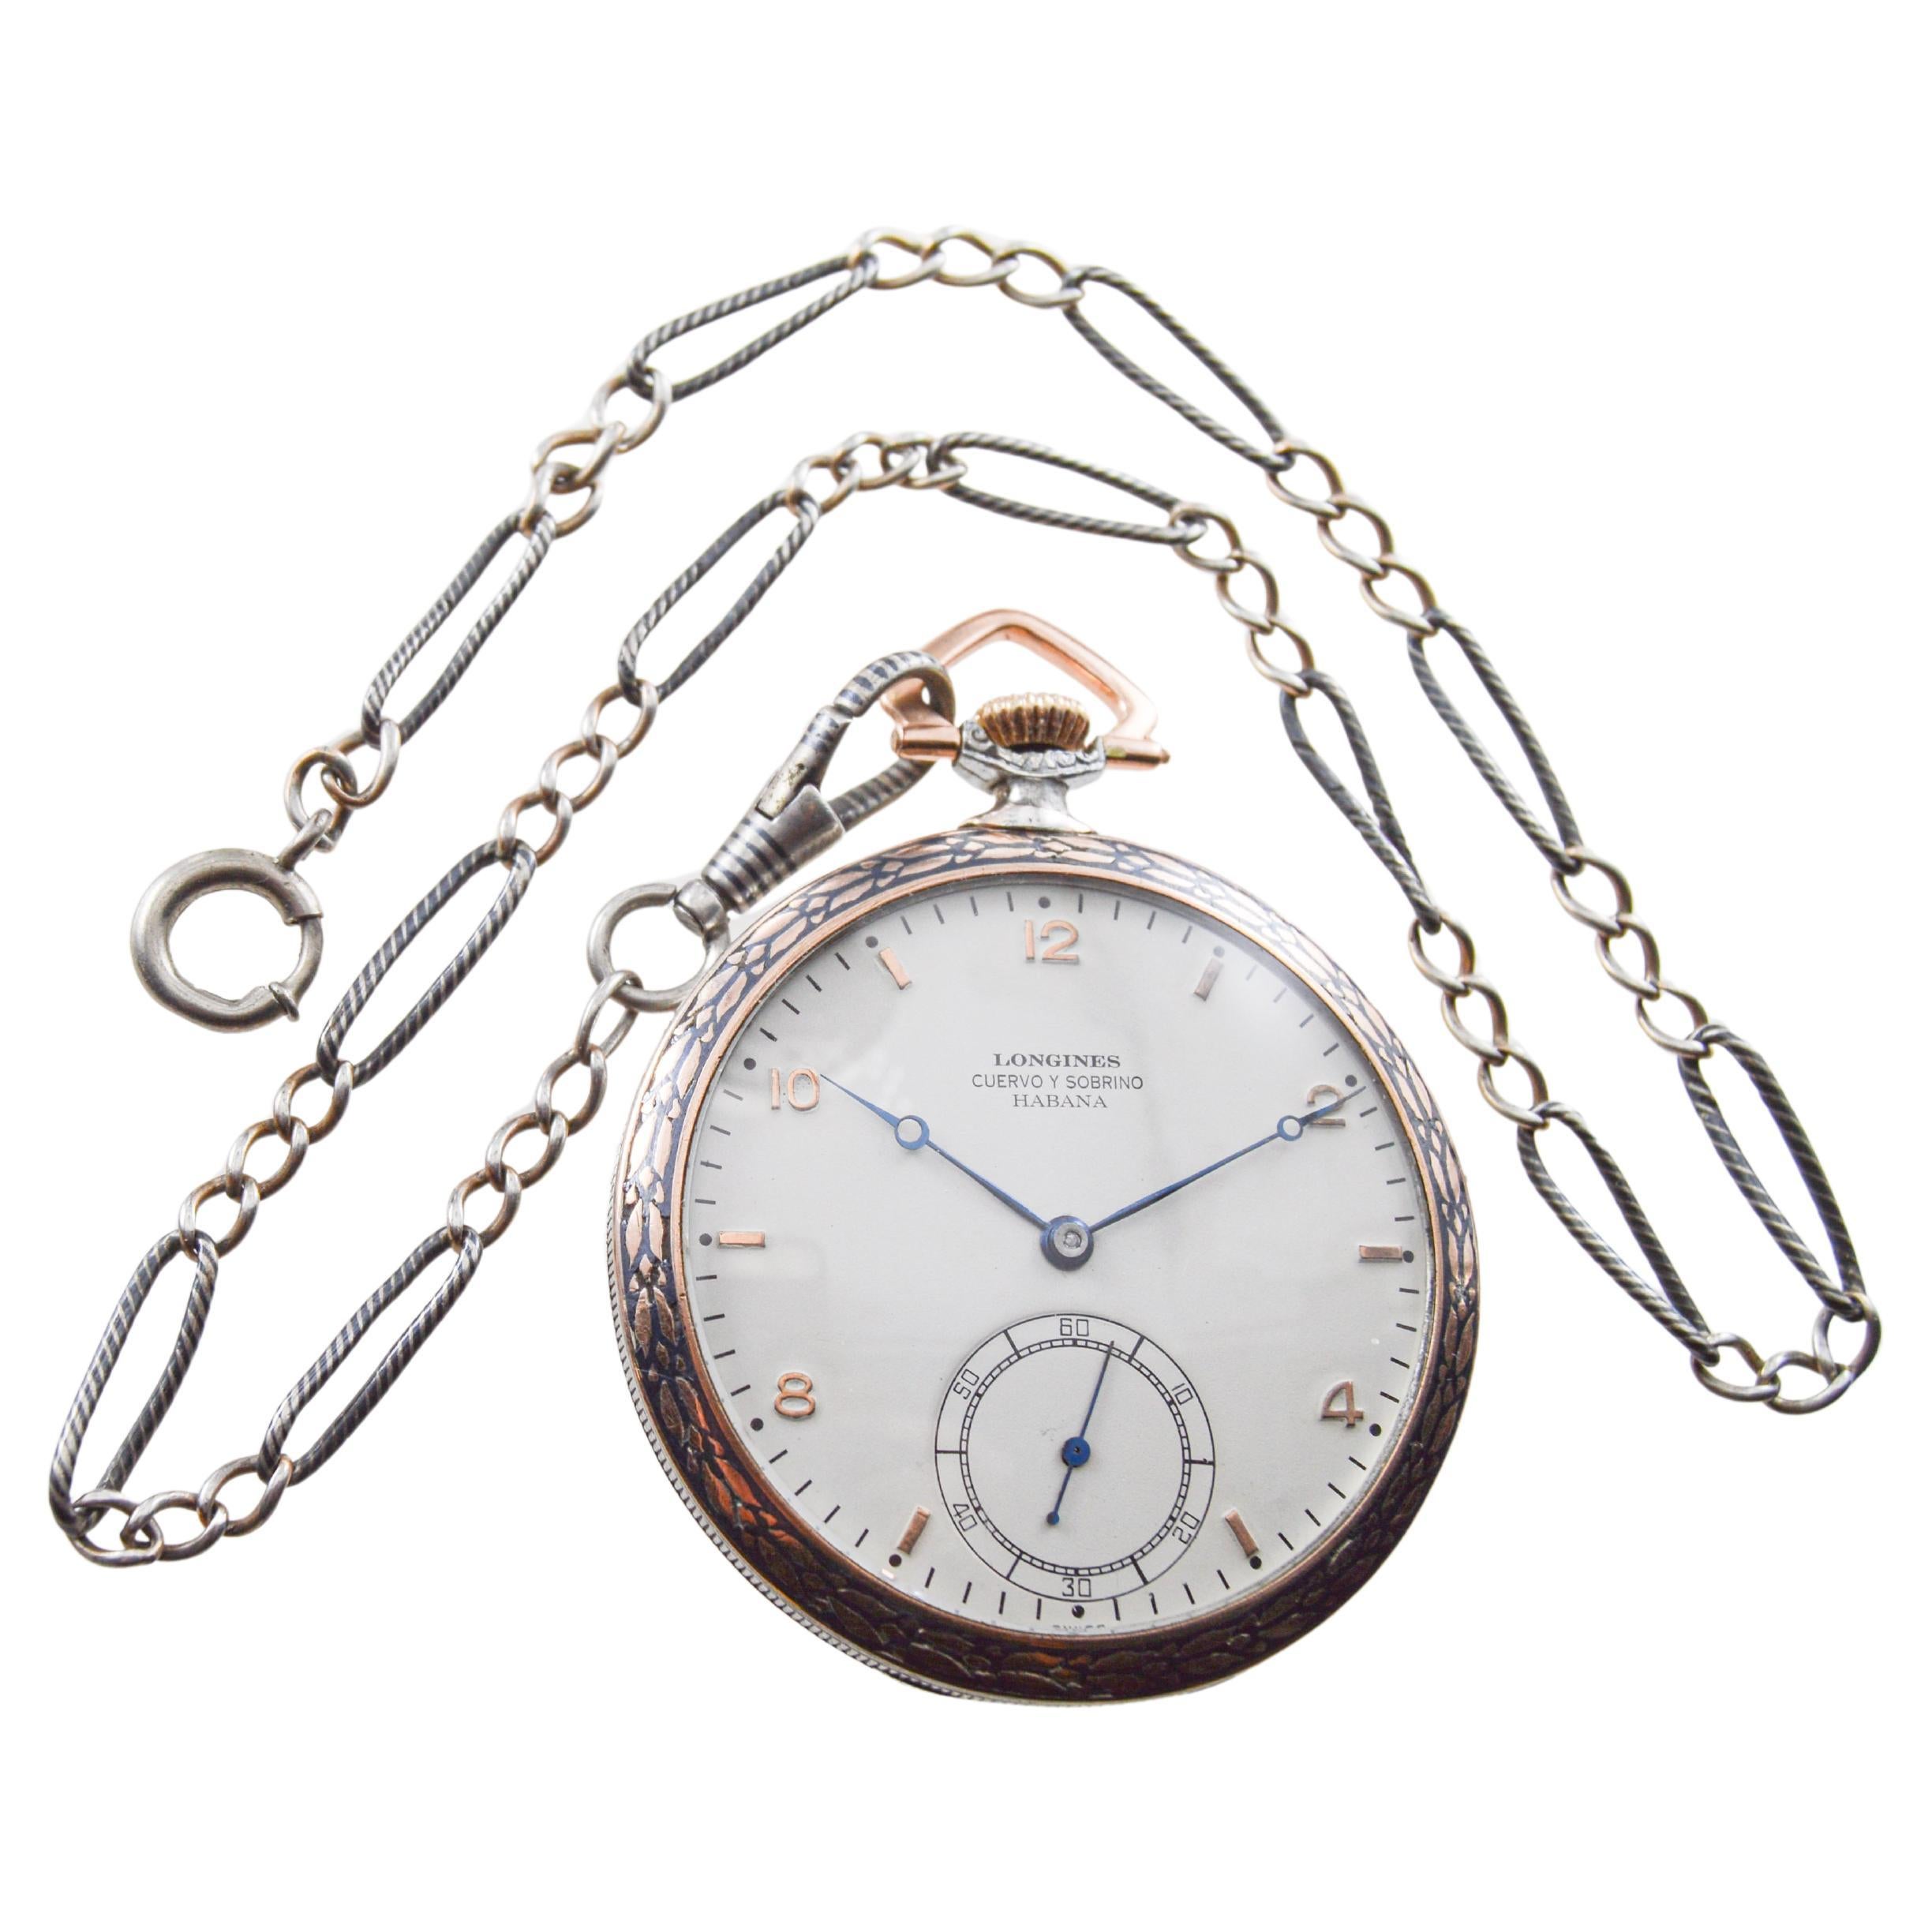 FACTORY / HOUSE: Longines for Cuervo & Sobrinos 
STYLE / REFERENCE: Open Faced Pocket Watch / Art Deco
METAL / MATERIAL: Silver / Rose Gold and Niello Inlayed
CIRCA / YEAR: 1940's
DIMENSIONS / SIZE: Length & Diameter 46mm
MOVEMENT / CALIBER: Manual